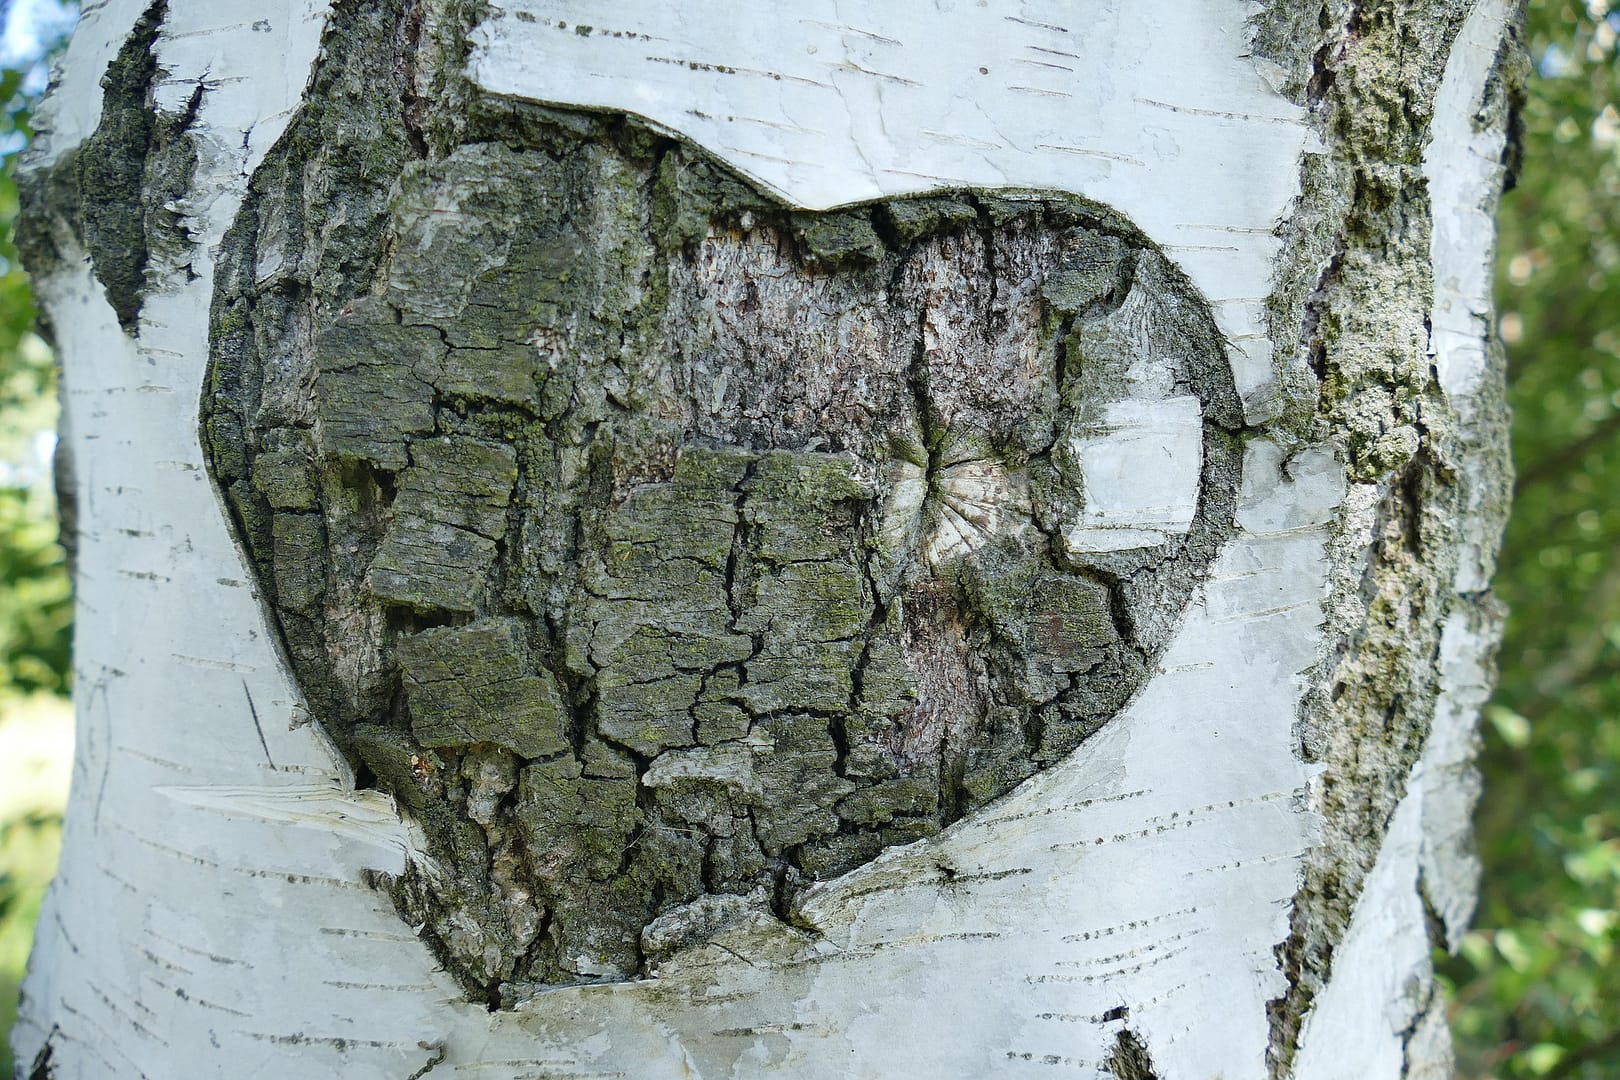 Close up of a birch tree with a heart carved into the bark